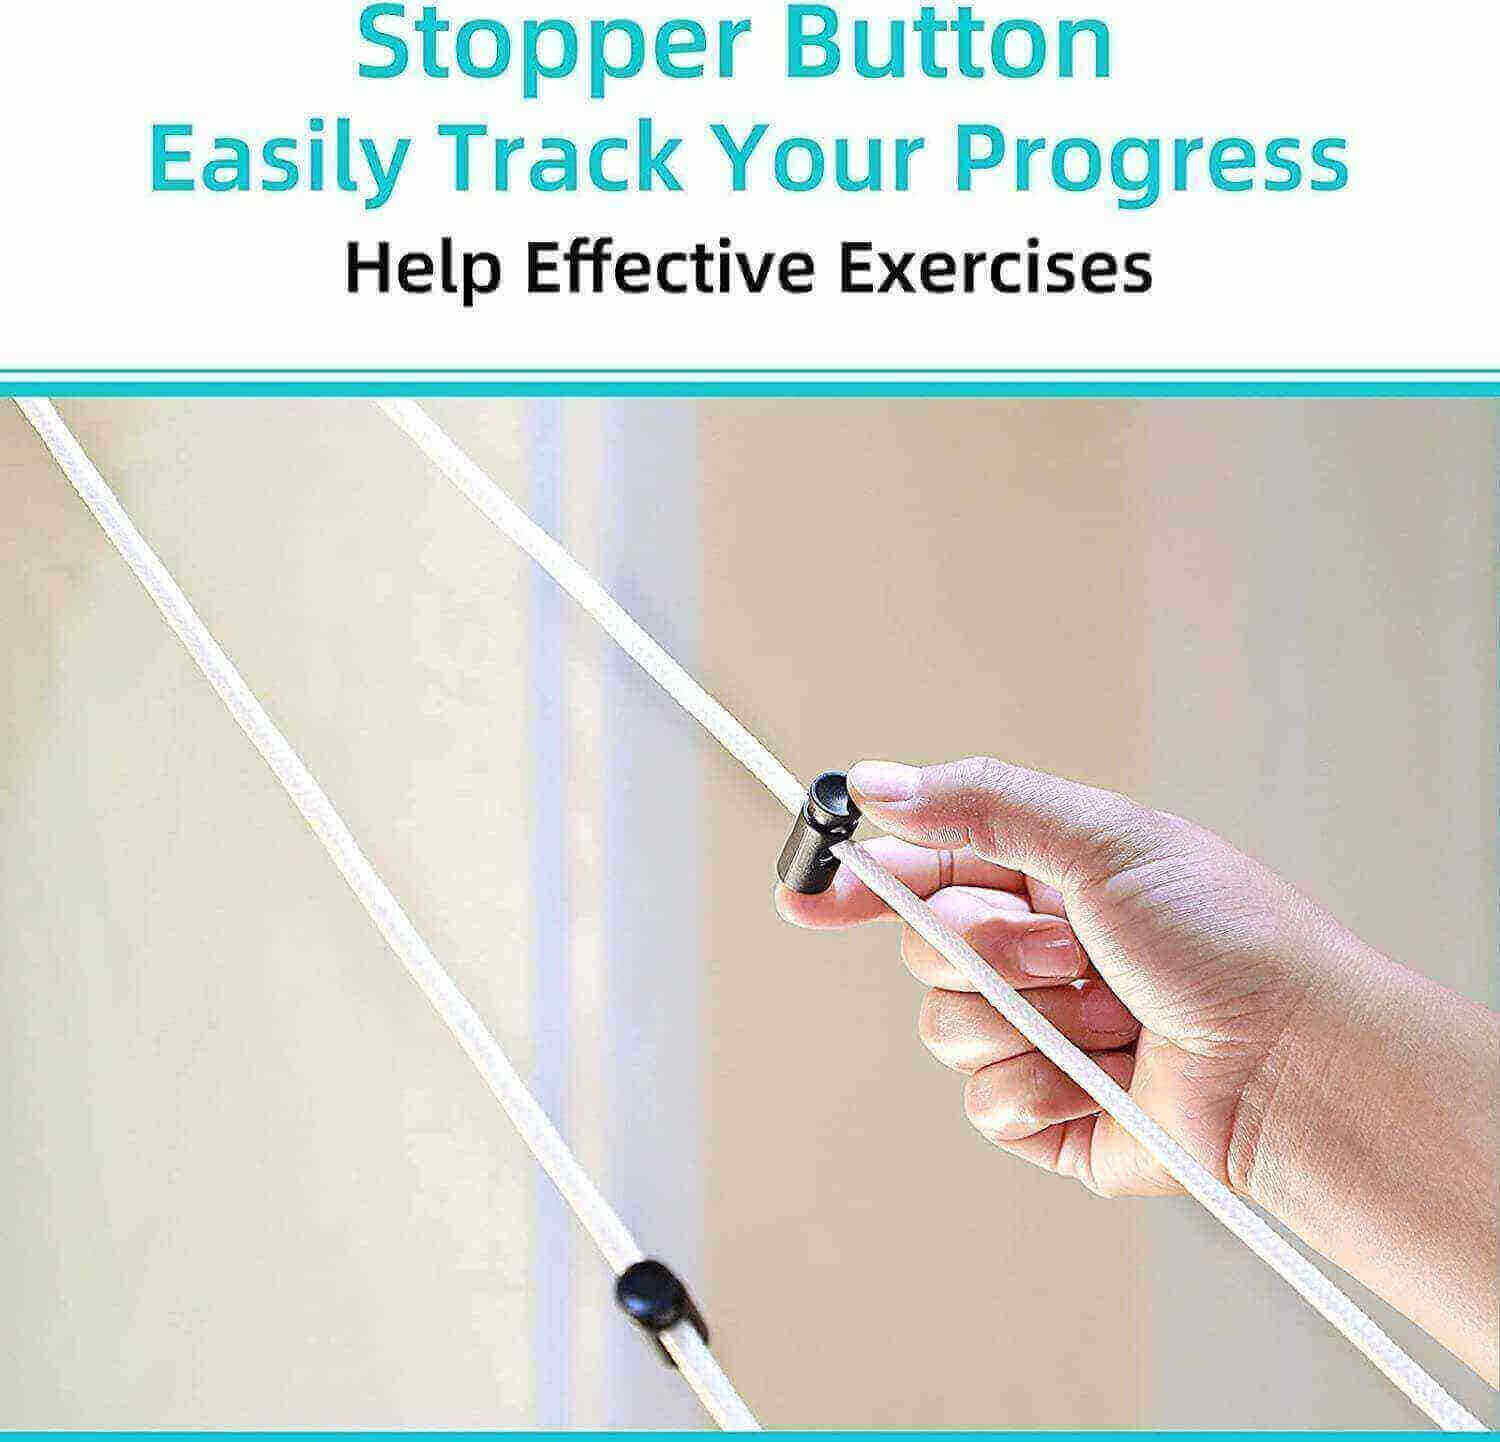 Fanwer Shoulder Pulley for Physical Therapy & Shoulder Pulley Workout, two stopper buttons